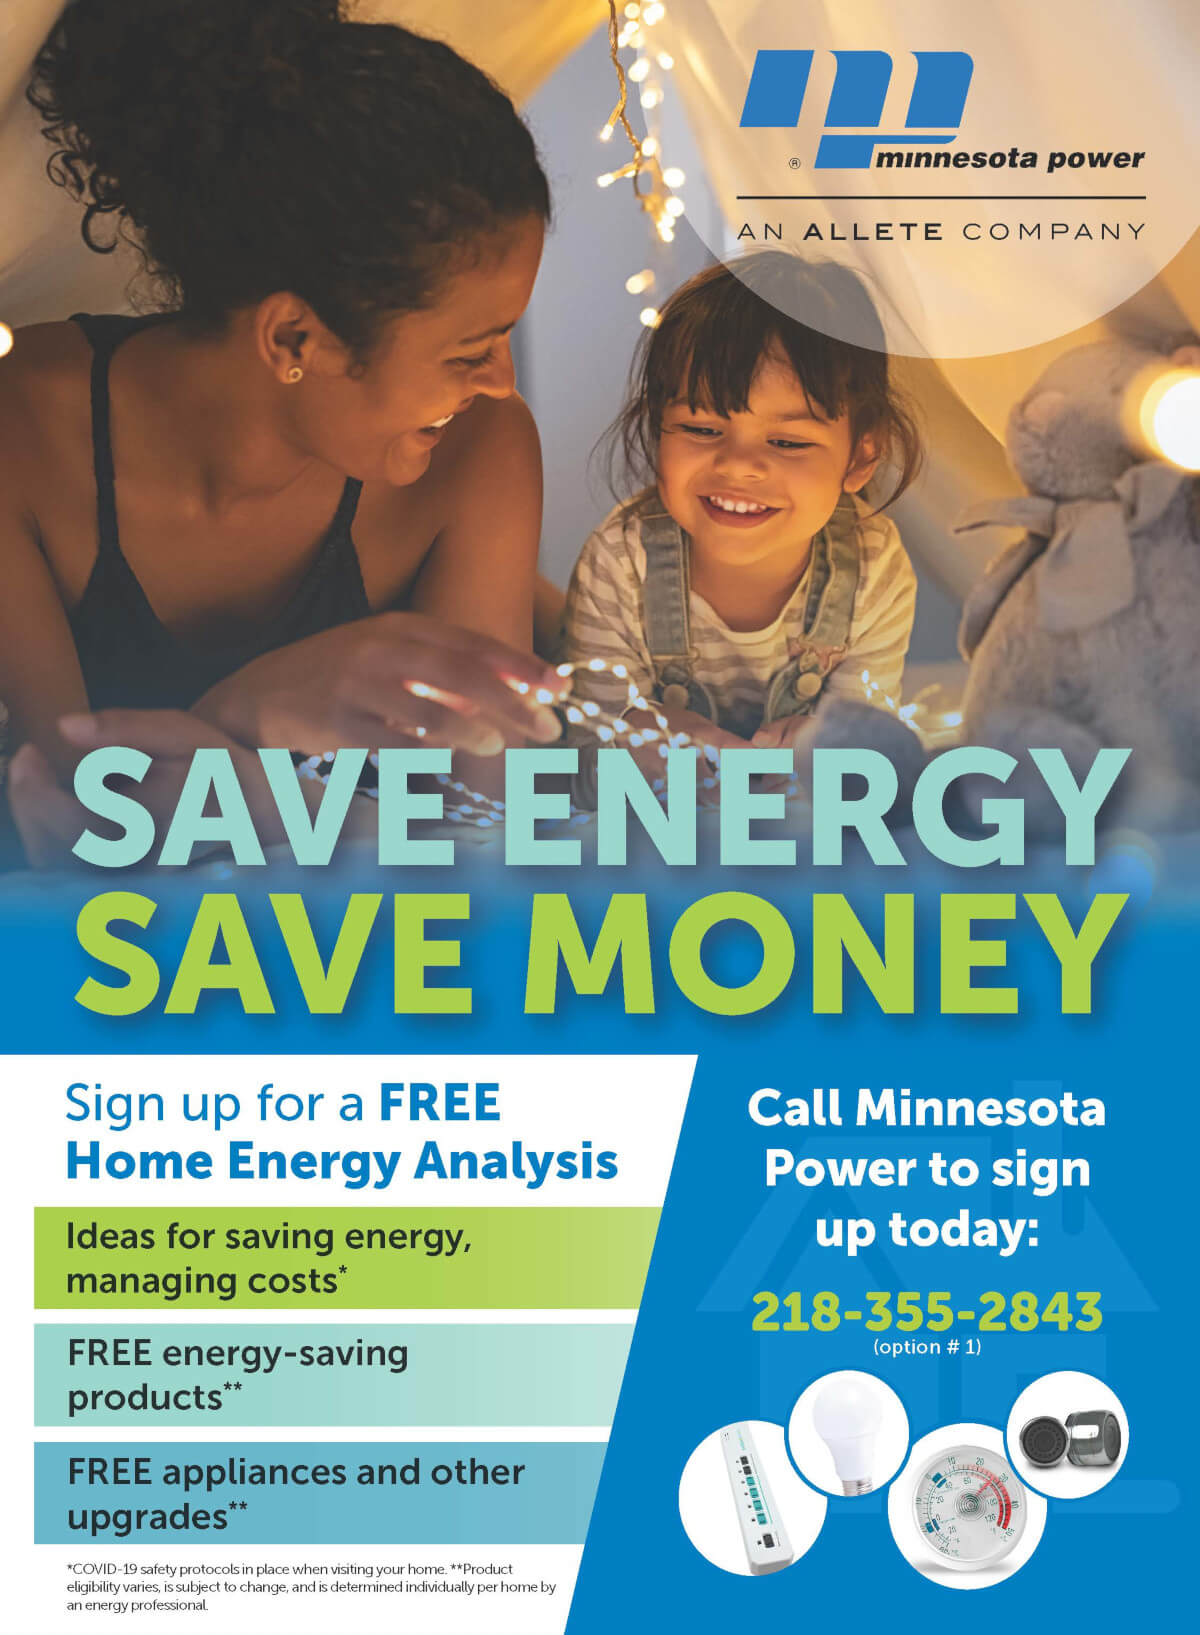 Save energy. Save money. Sign up for a free home energy analysis.